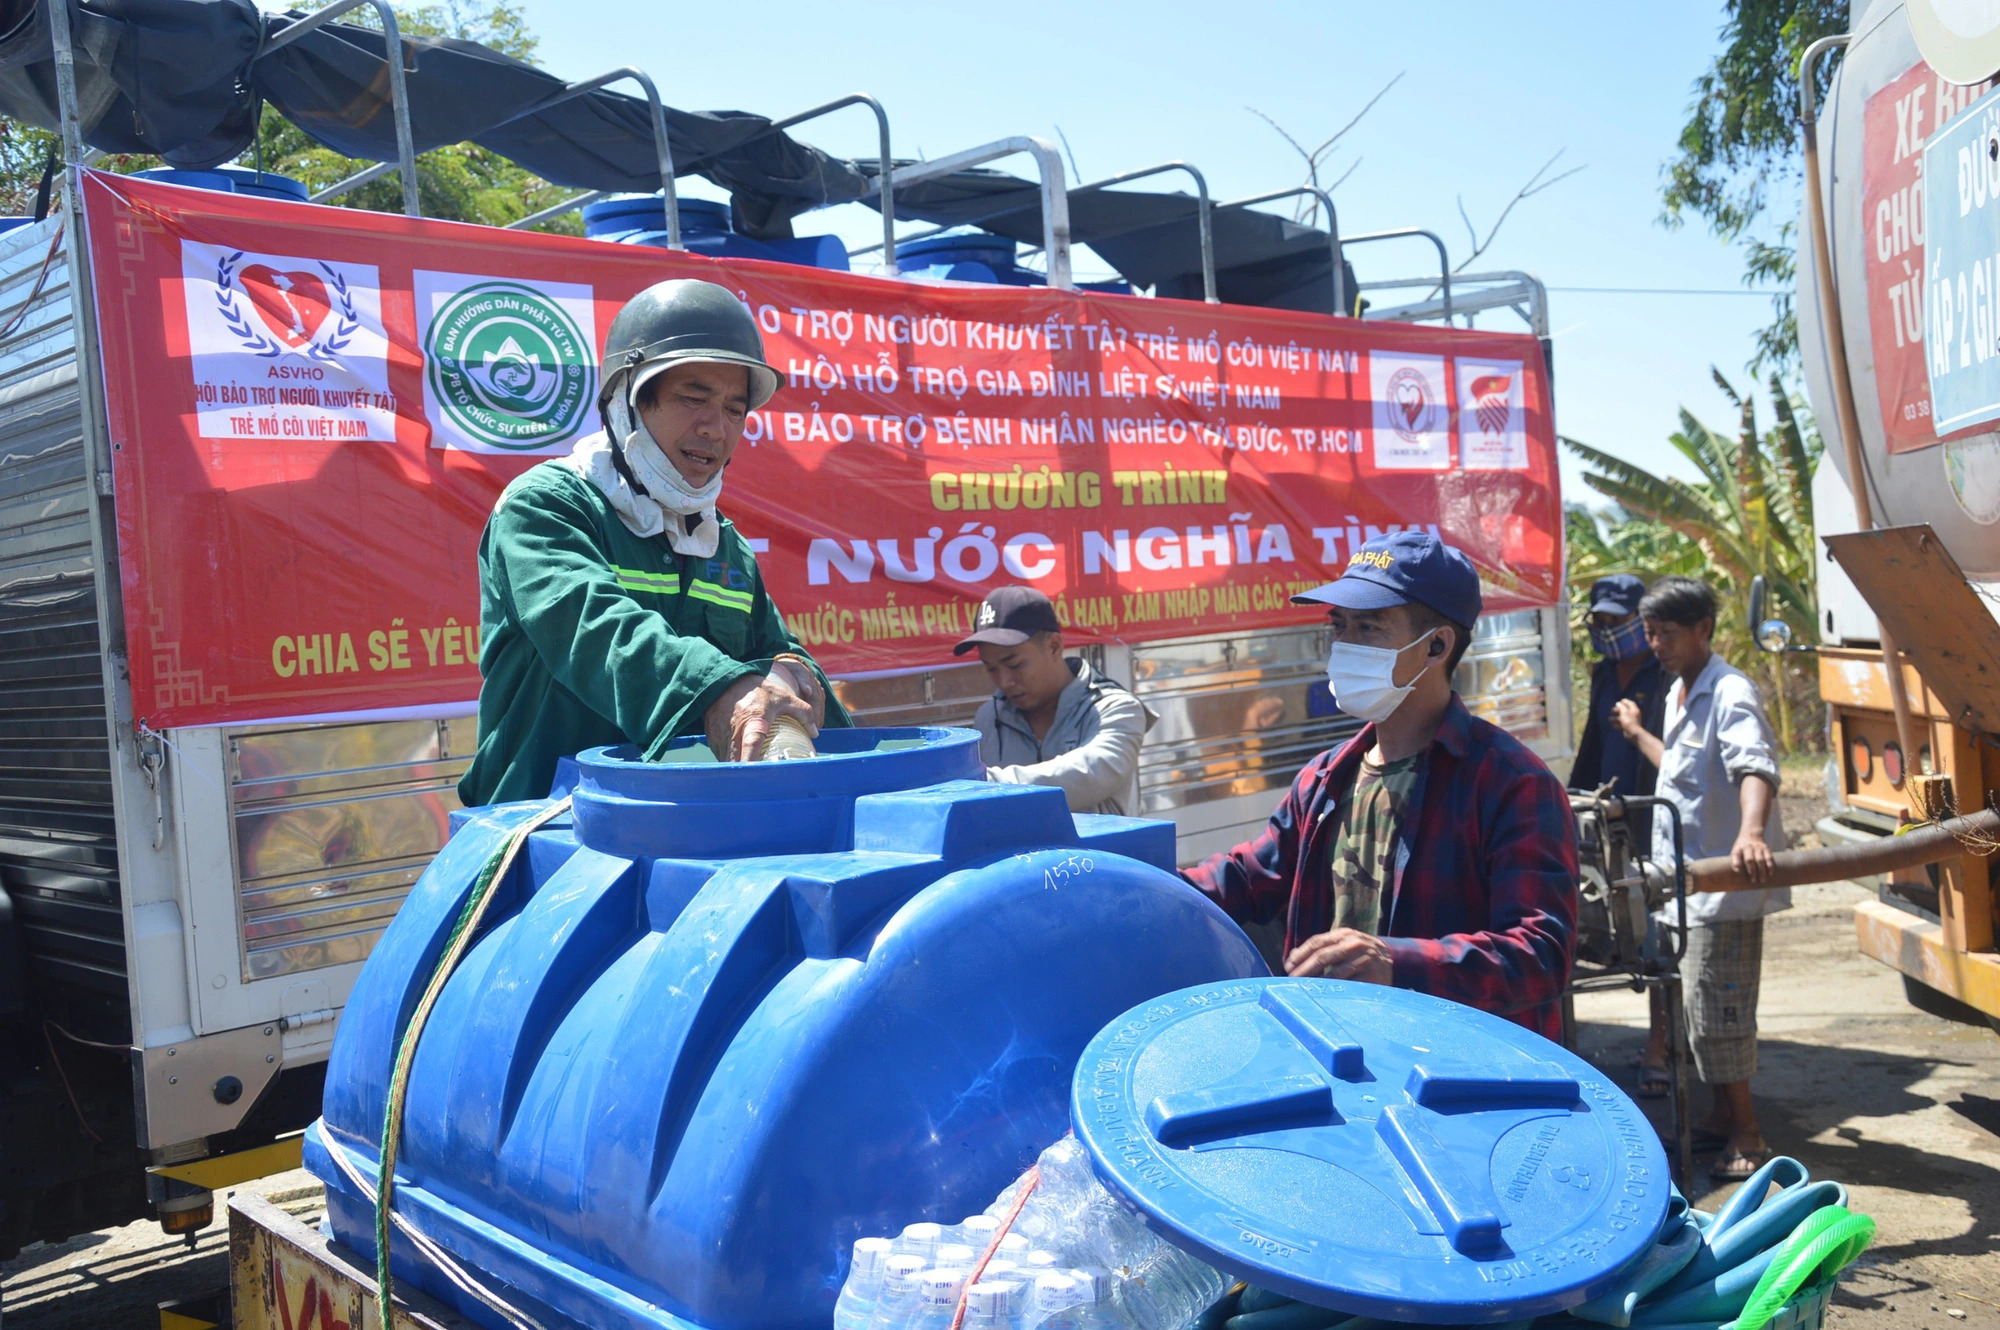 Local residents of Tien Giang Province, southern Vietnam take along a large water container to get fresh water offered by generous donors. Photo: Mau Truong / Tuoi Tre